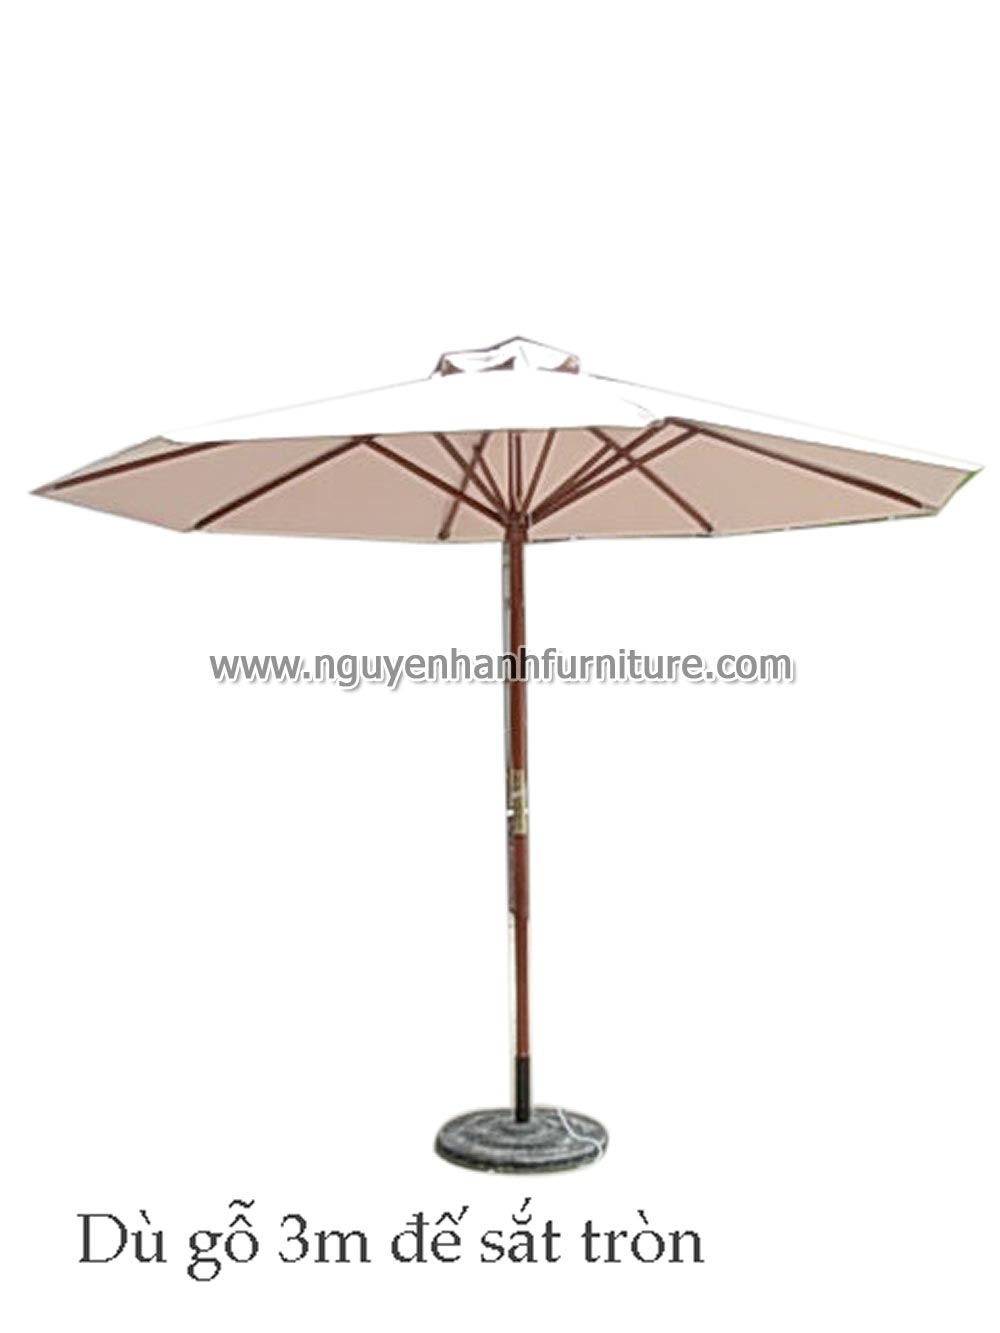 Name product: Wooden umbrella with round iron base- Dimensions: 3m diameter - Description: Red oil wood